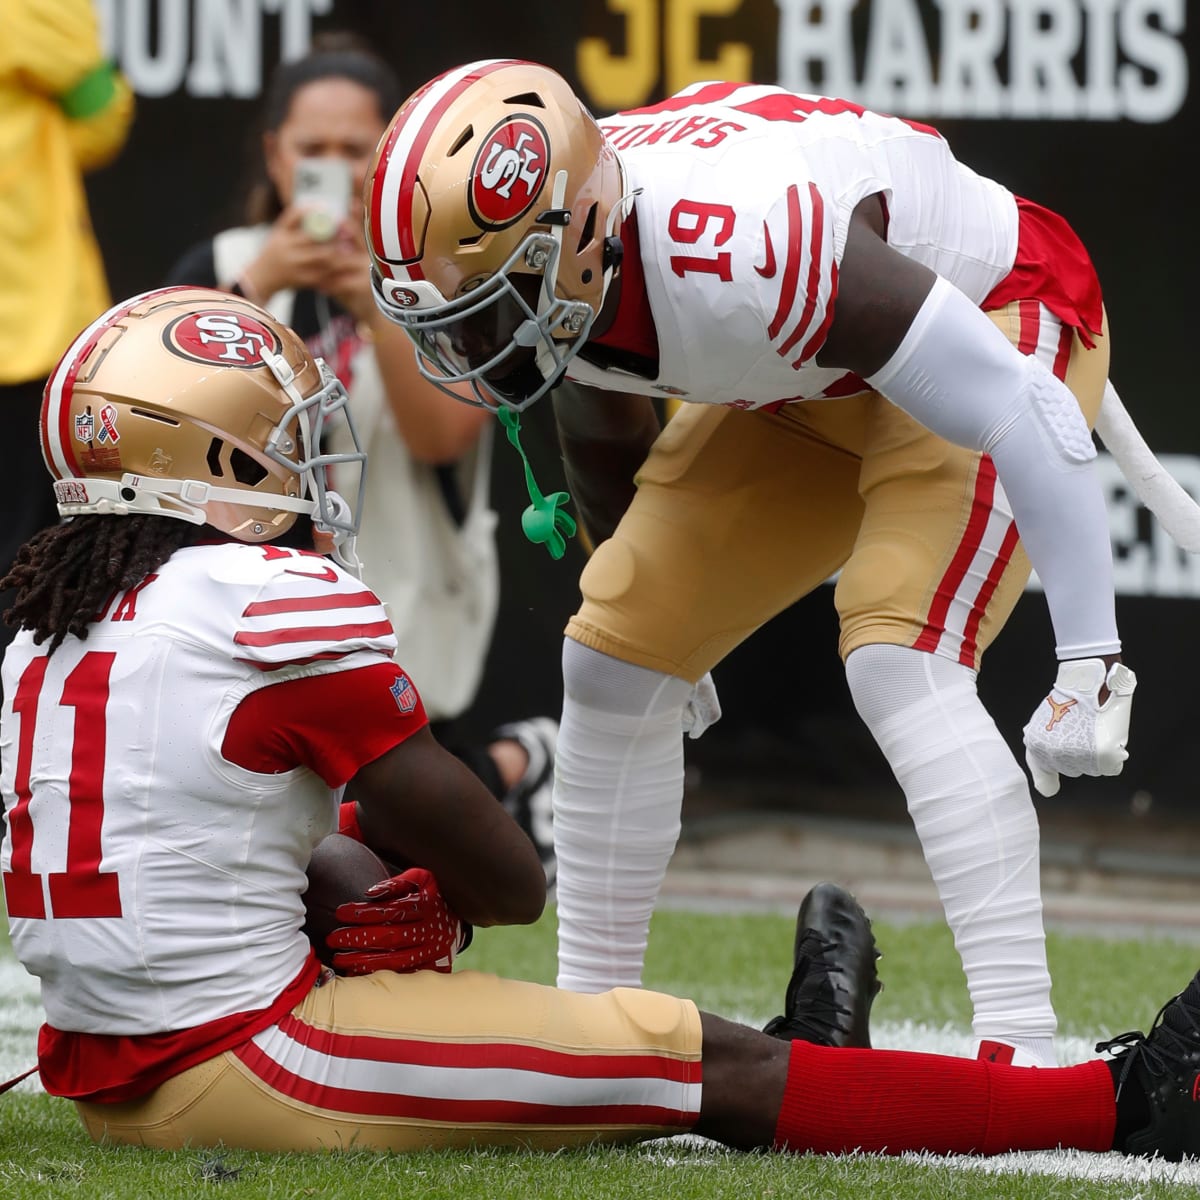 NFL Power Rankings: 49ers Surge to the Top Following #SFvsPIT